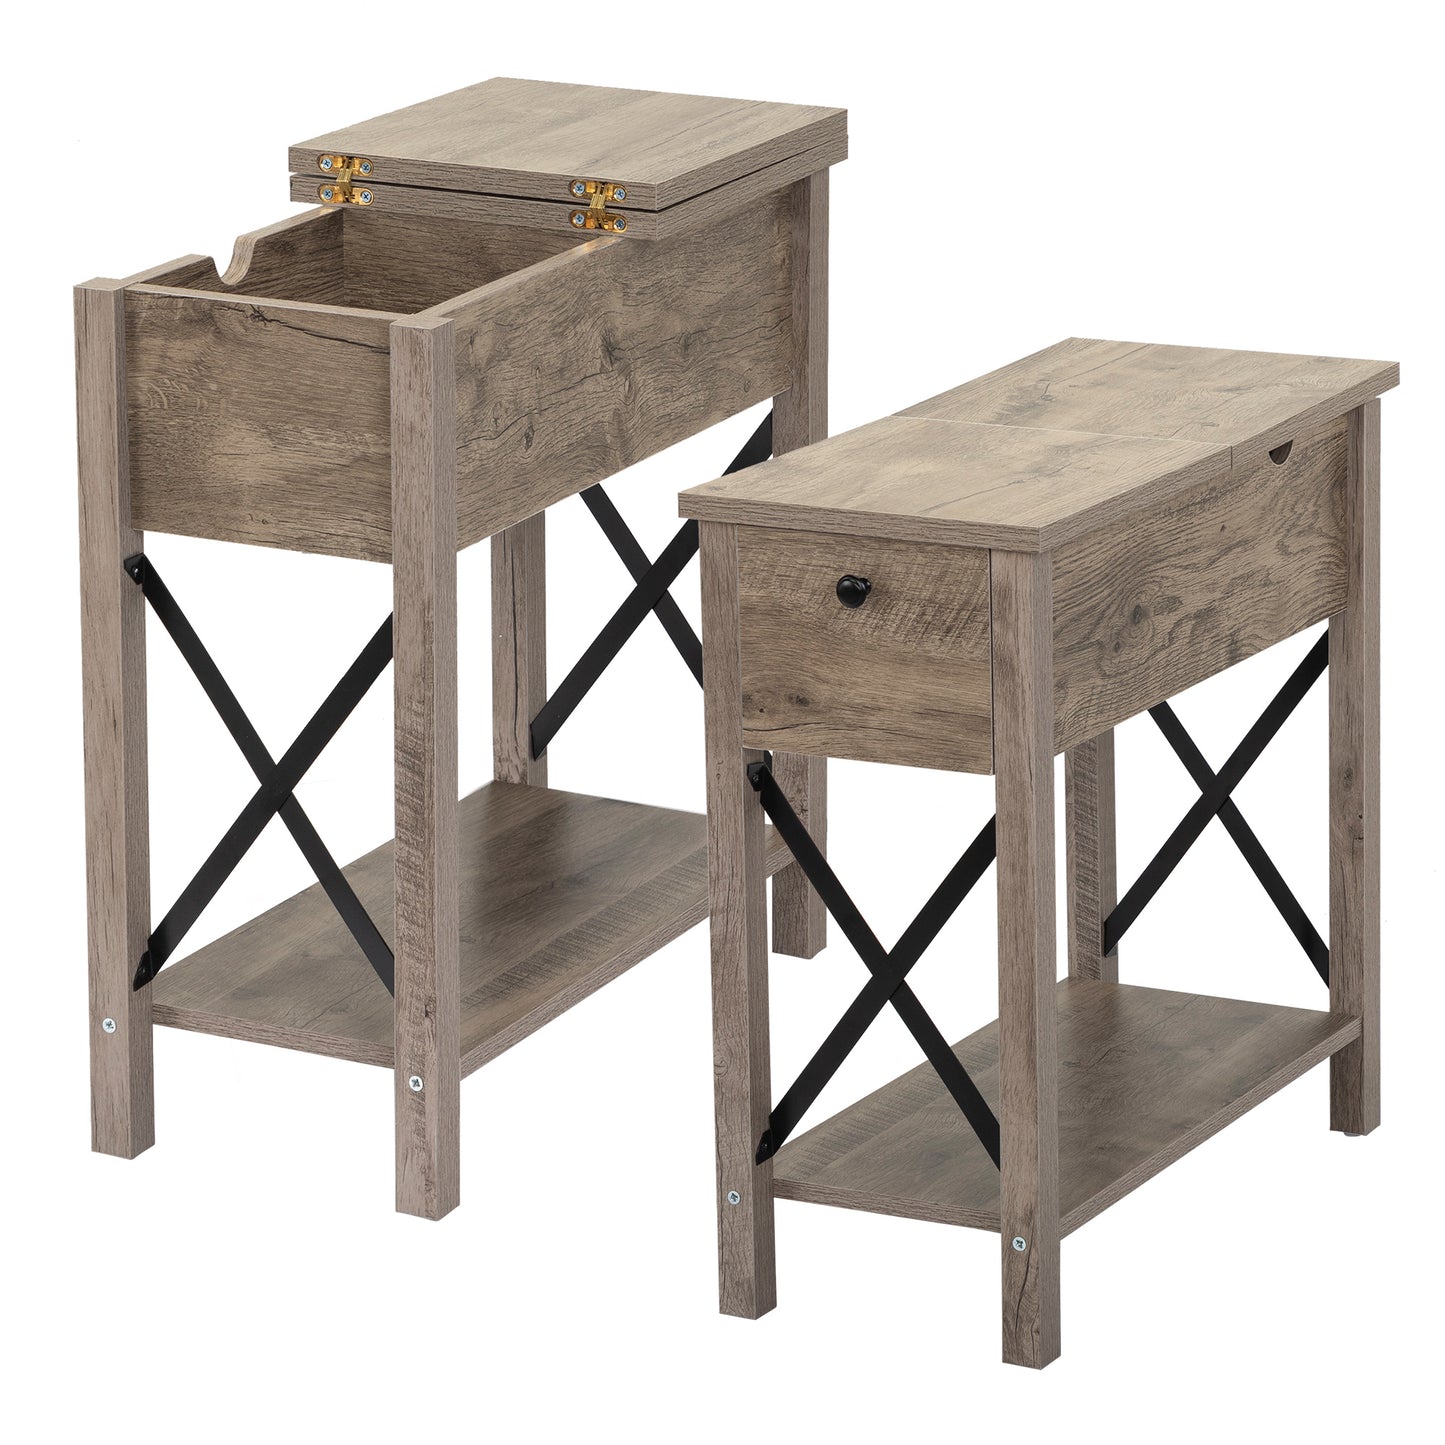 Side Table for Living Room, Nightstand Set of 2, Modern Side Cabinet with 2 Drawers, Open Shelf, Power Outlets and USB Ports, Wood End Table with Storage, Bedside Table for Bedroom, Espresso, D4683